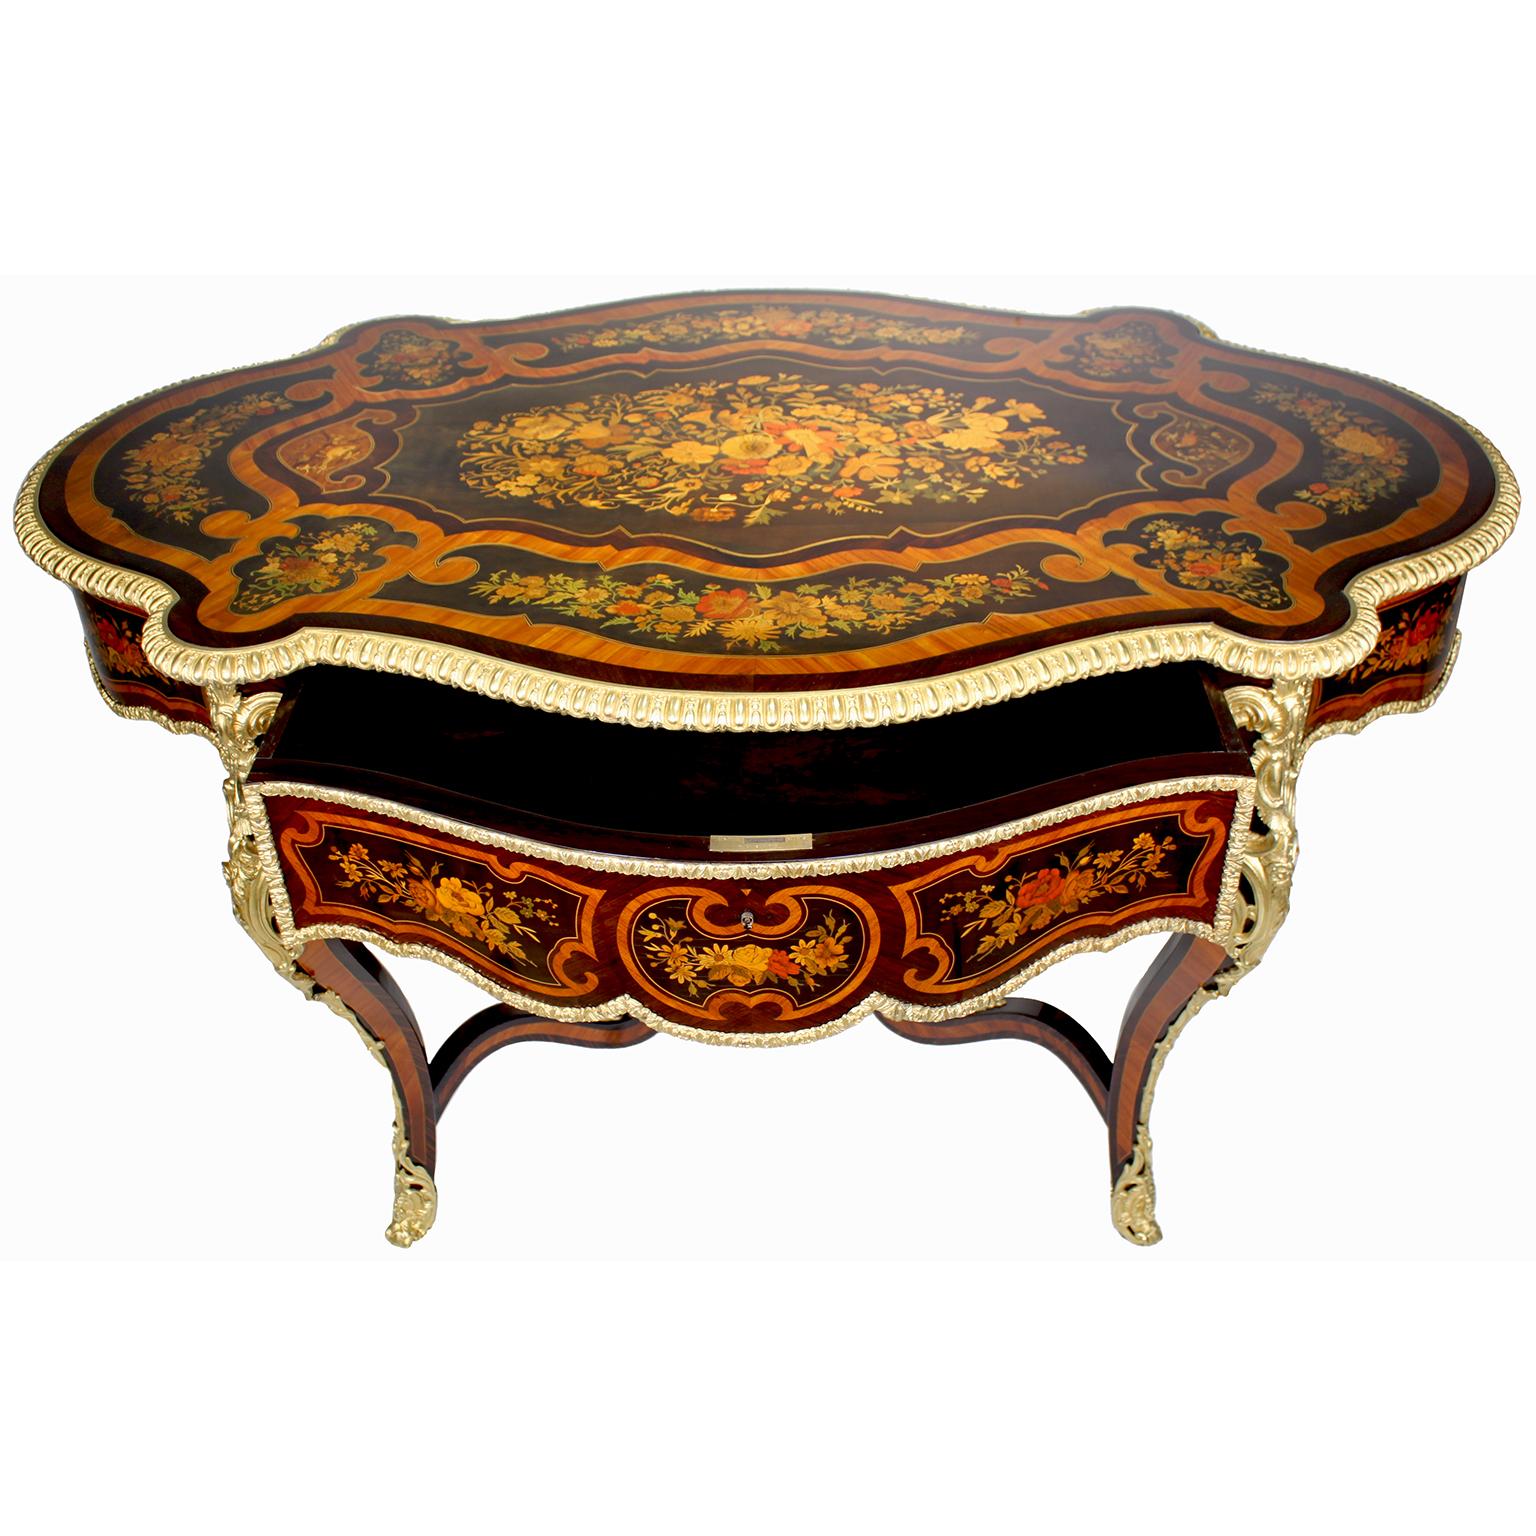 French 19th Century Louis XV Style Gilt-Bronze Mounted Marquetry Center Table For Sale 8